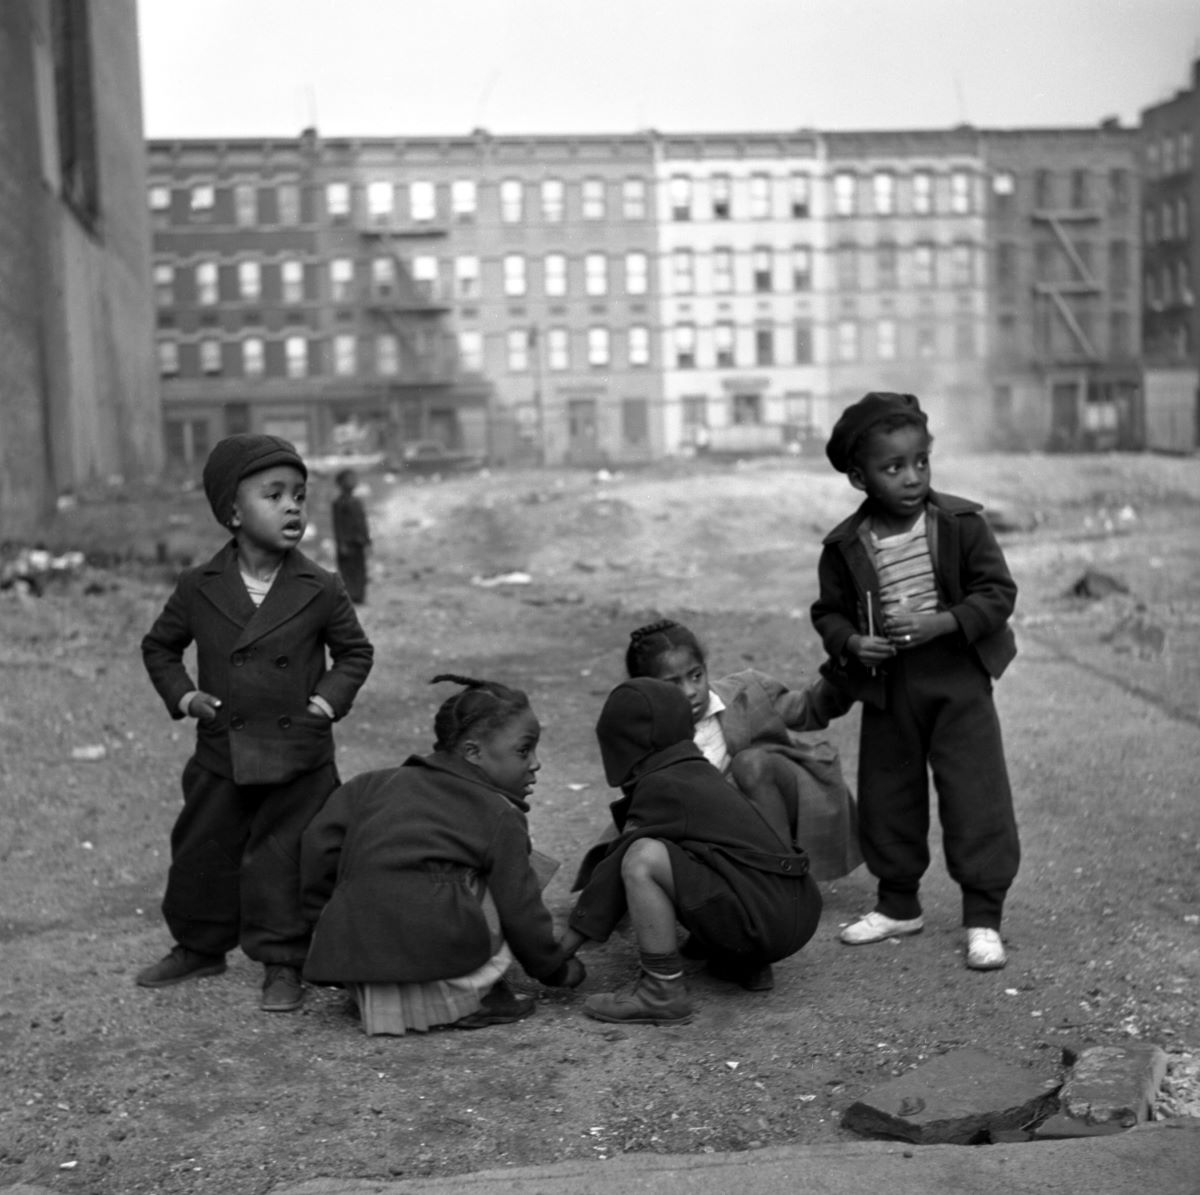 Children playing in vacant lot, New York City, c. 1946